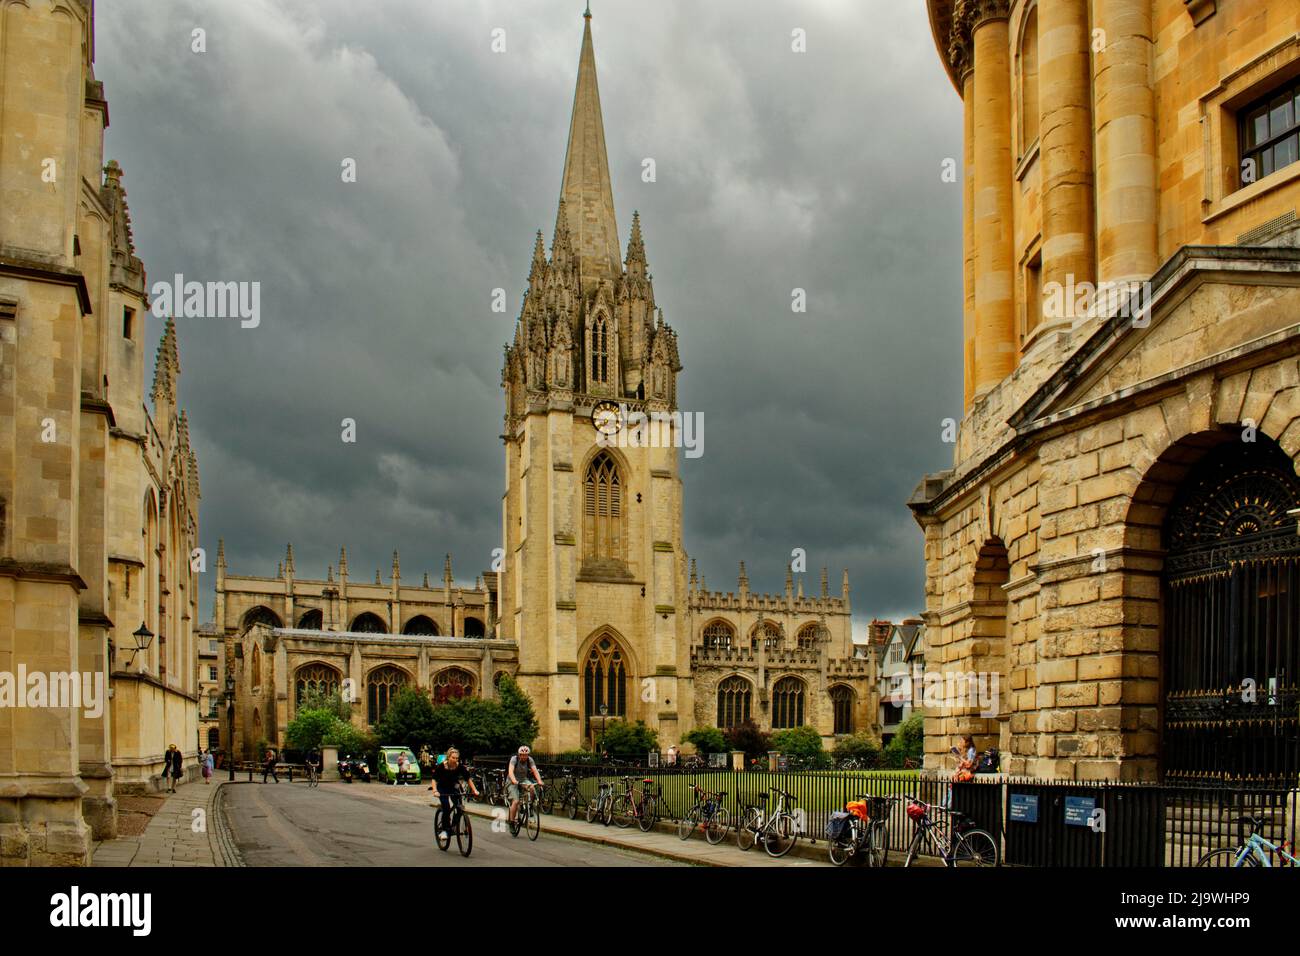 OXFORD CITY ENGLAND CATTE STREET AND STORMY CLOUDS OVER UNIVERSITY CHURCH OF ST MARY THE VIRGIN Stock Photo